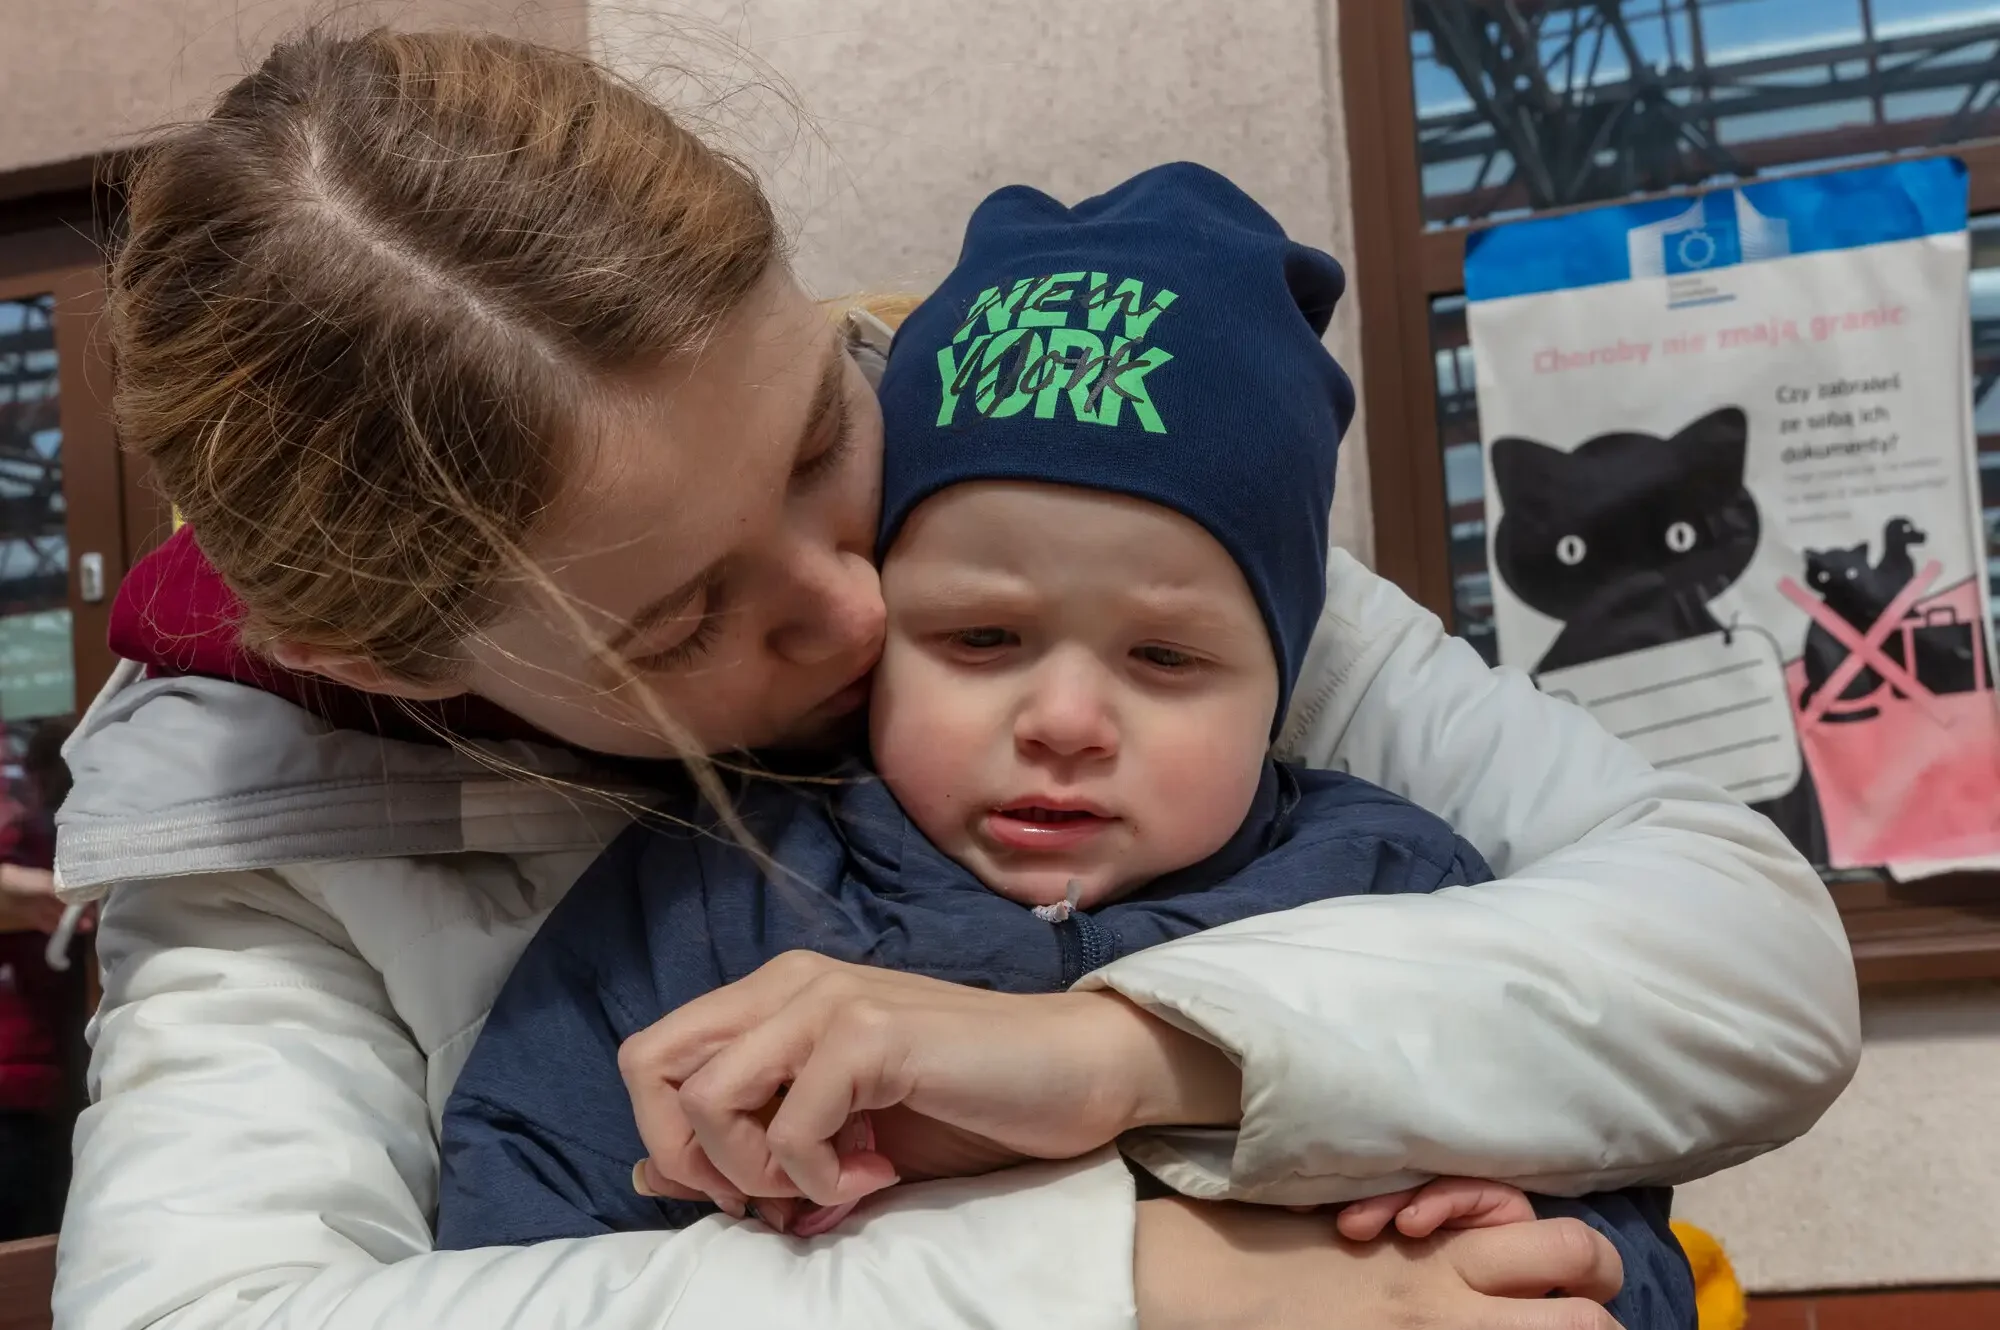 Ukrainian refugee Marina shares a moment with her son, Timur, moments after passing through border control into Poland near the town of Hrebenne. Mother and son were fleeing Pactava in Ukraine. CARE is working with our partners Polish Humanitarian Action (PAH) at the border and elsewhere to provide food, water, clothing and other necessities to refugees.